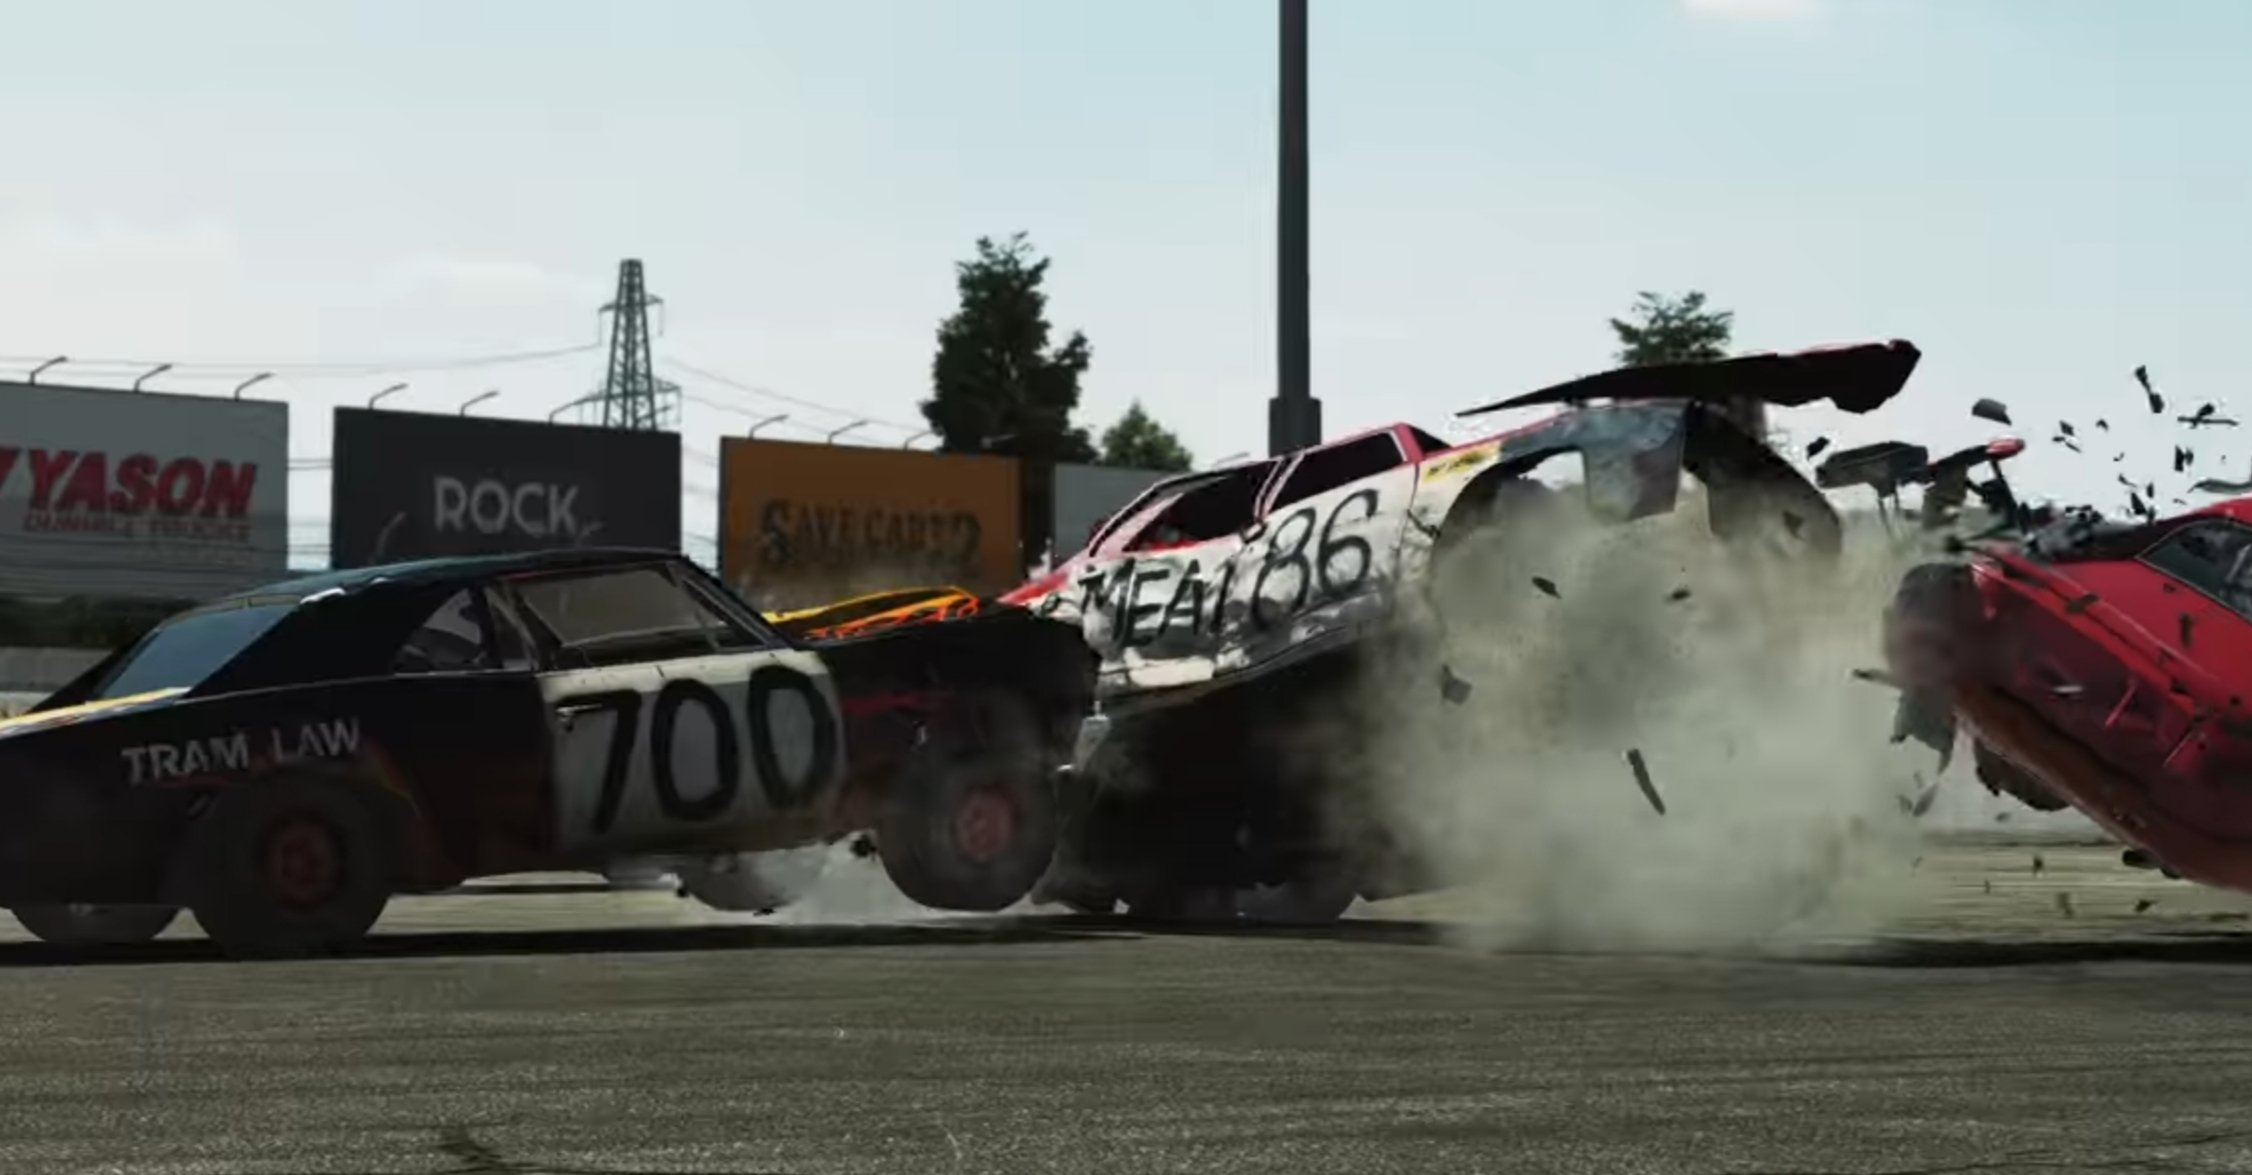 PS4 And Xbox One Version Of Wreckfest Finally Gets An Official Release Date